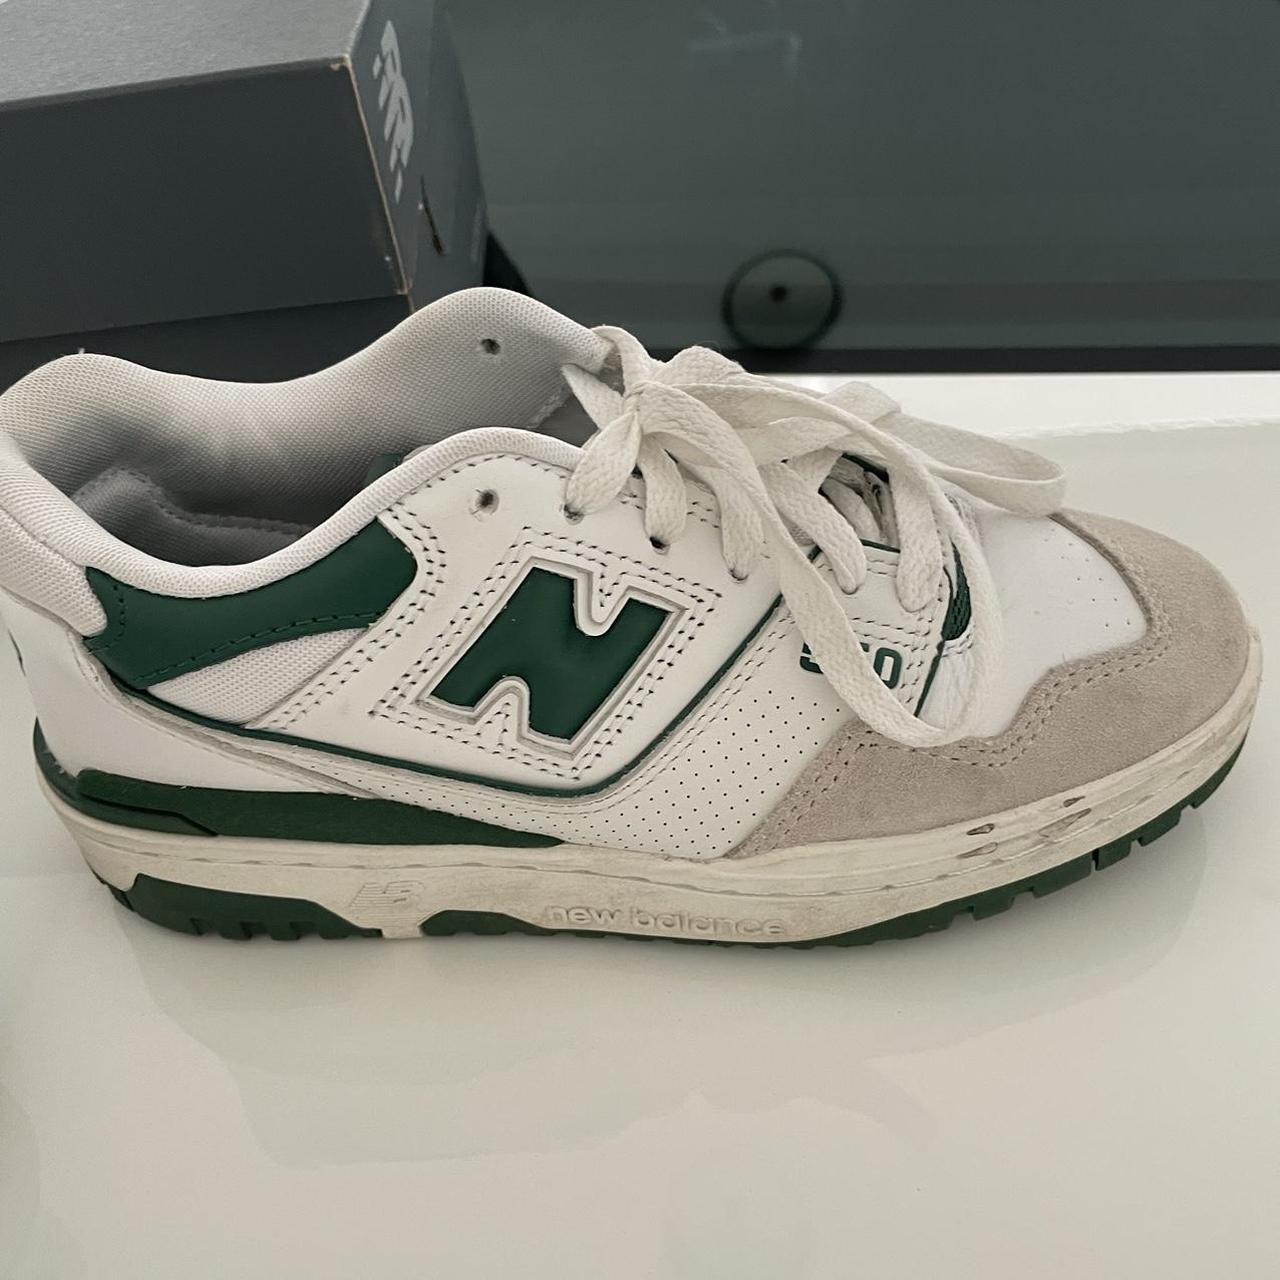 New Balance Women's White and Green Trainers | Depop